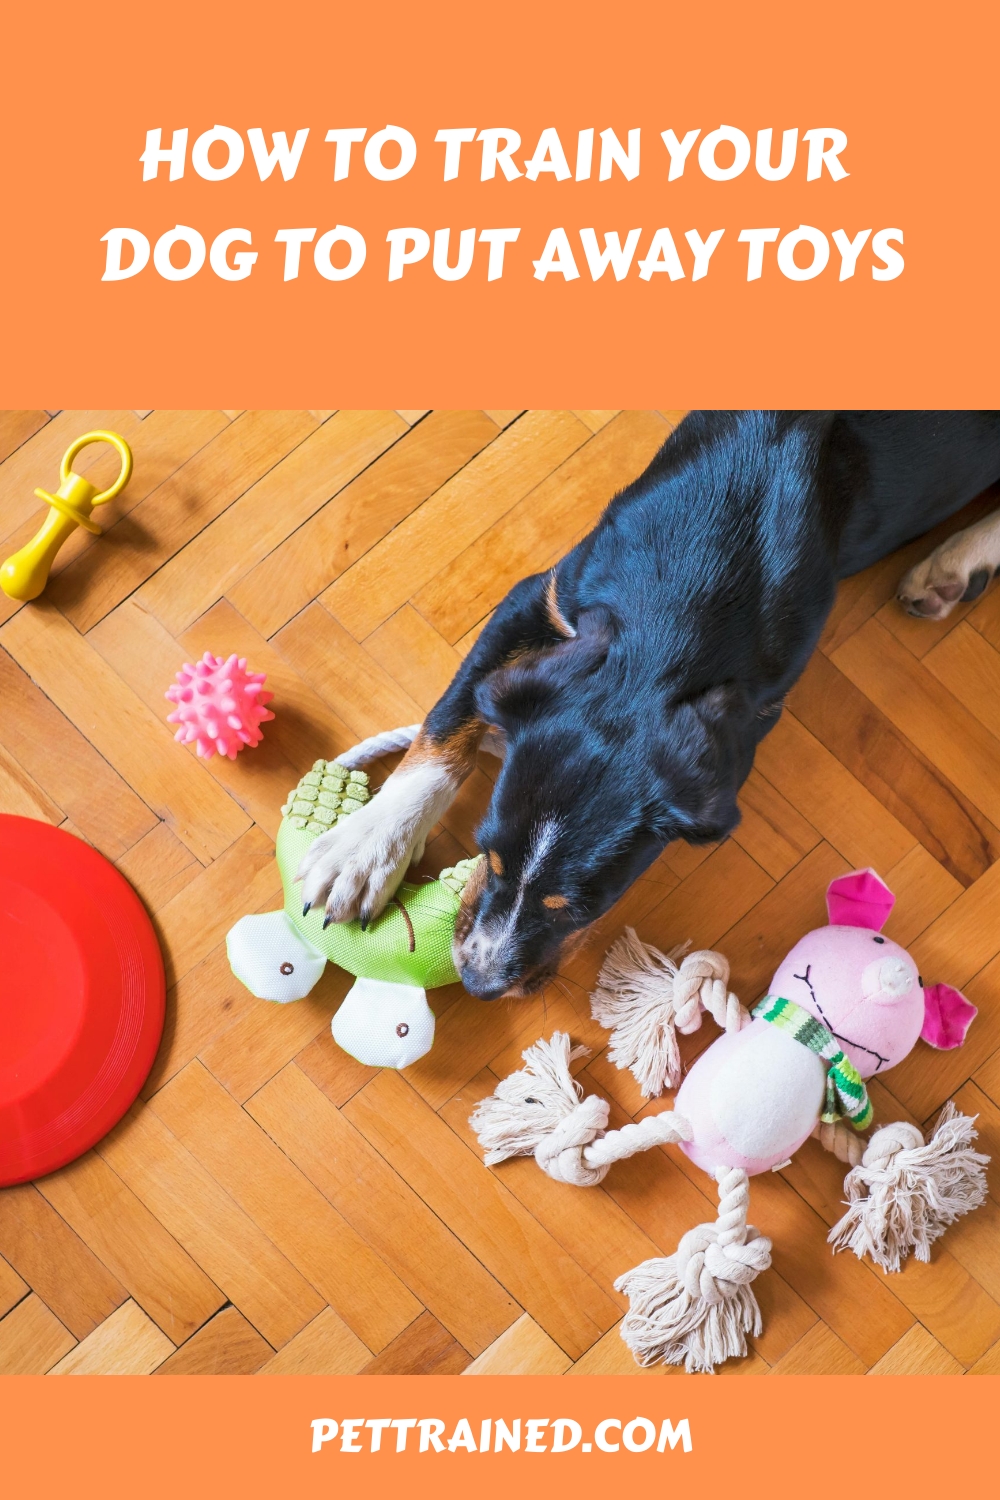 How to Train Your Dog to Put Away Toys